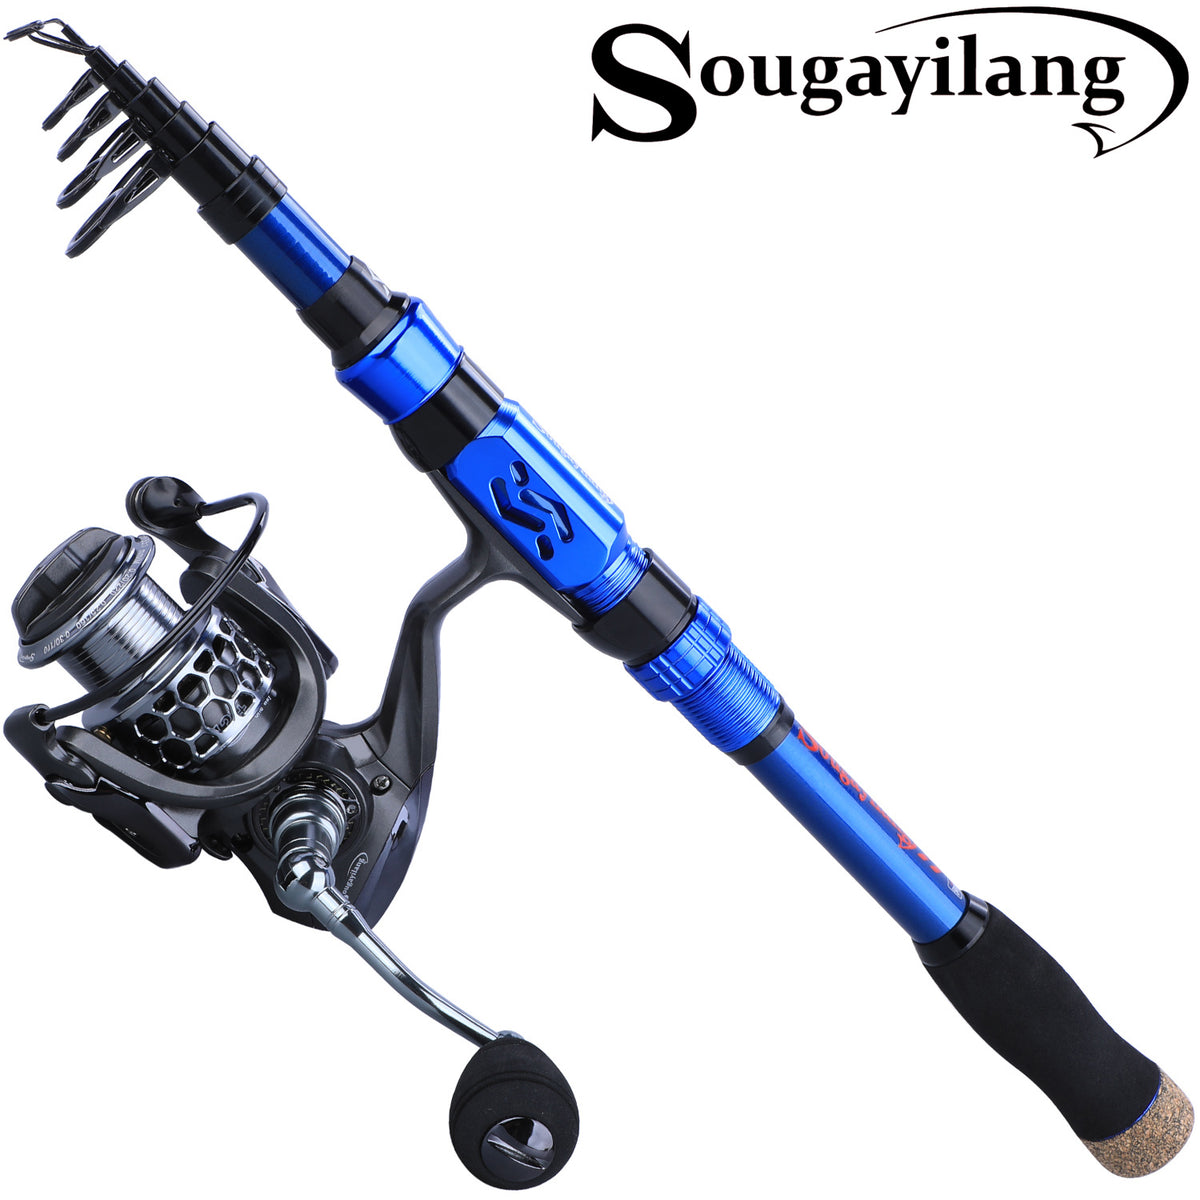 Sougayilang Top Quality 1.8M-3.0M Fishing Rod Reel Combo Carbon Fiber  Telescopic Fishing Pole and 13+1BB 5.5:1 Spinning Reel Set